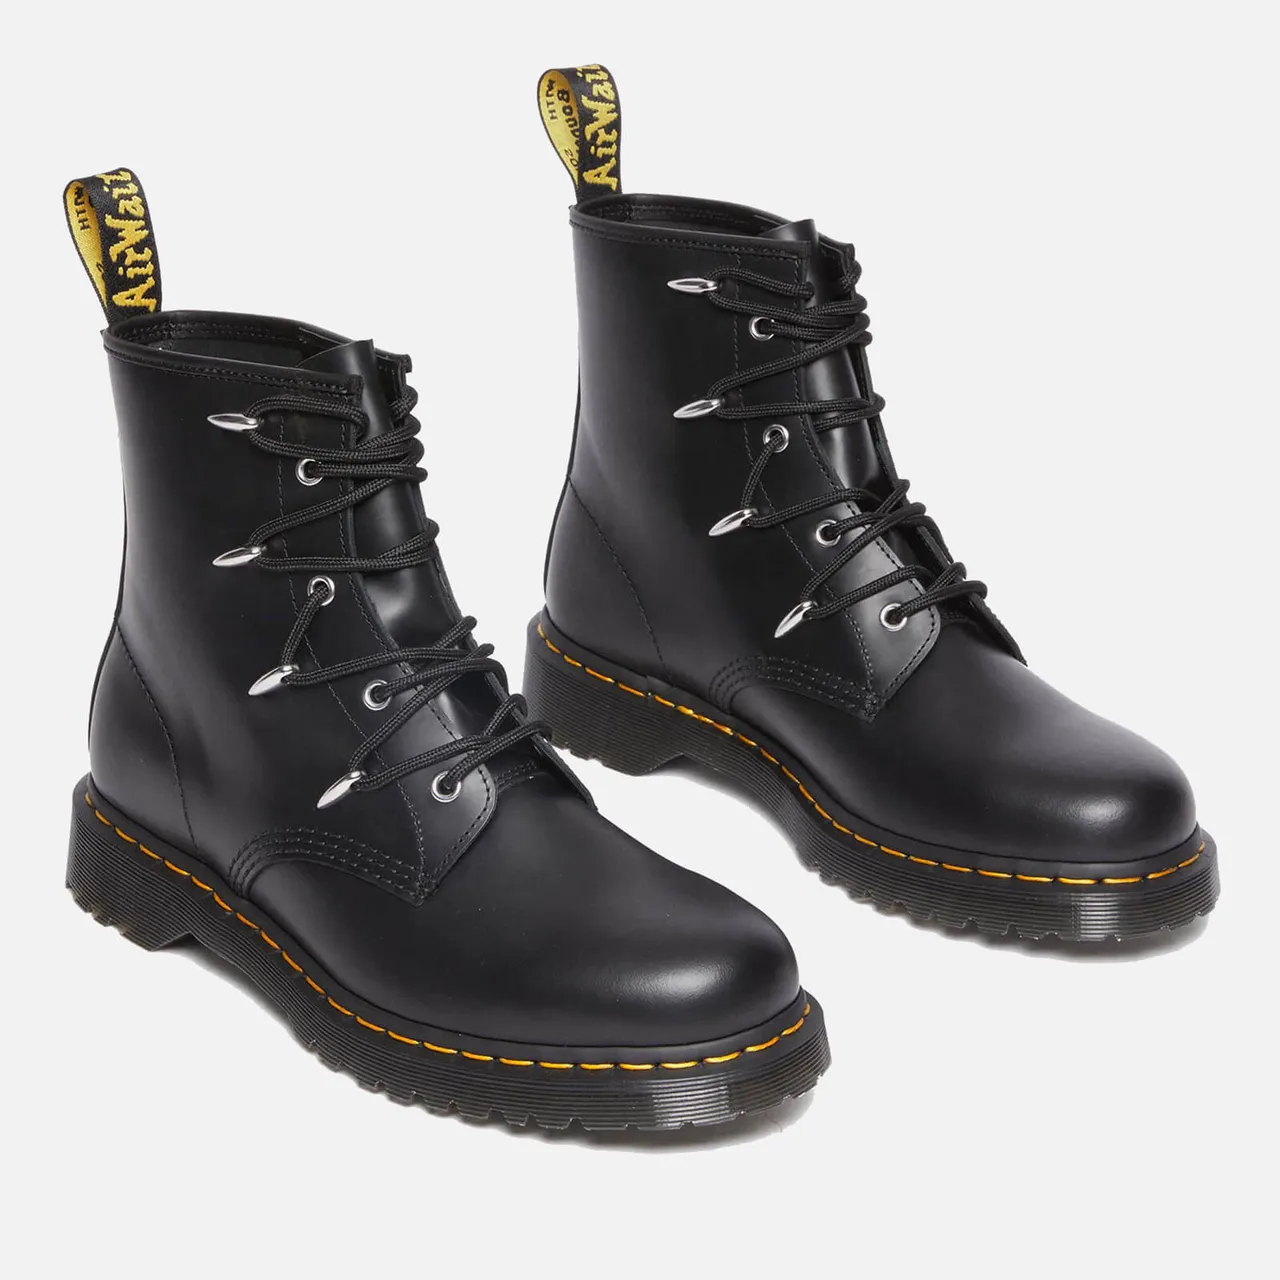 Dr. Martens Women's 1460 Leather 8-Eye Boots